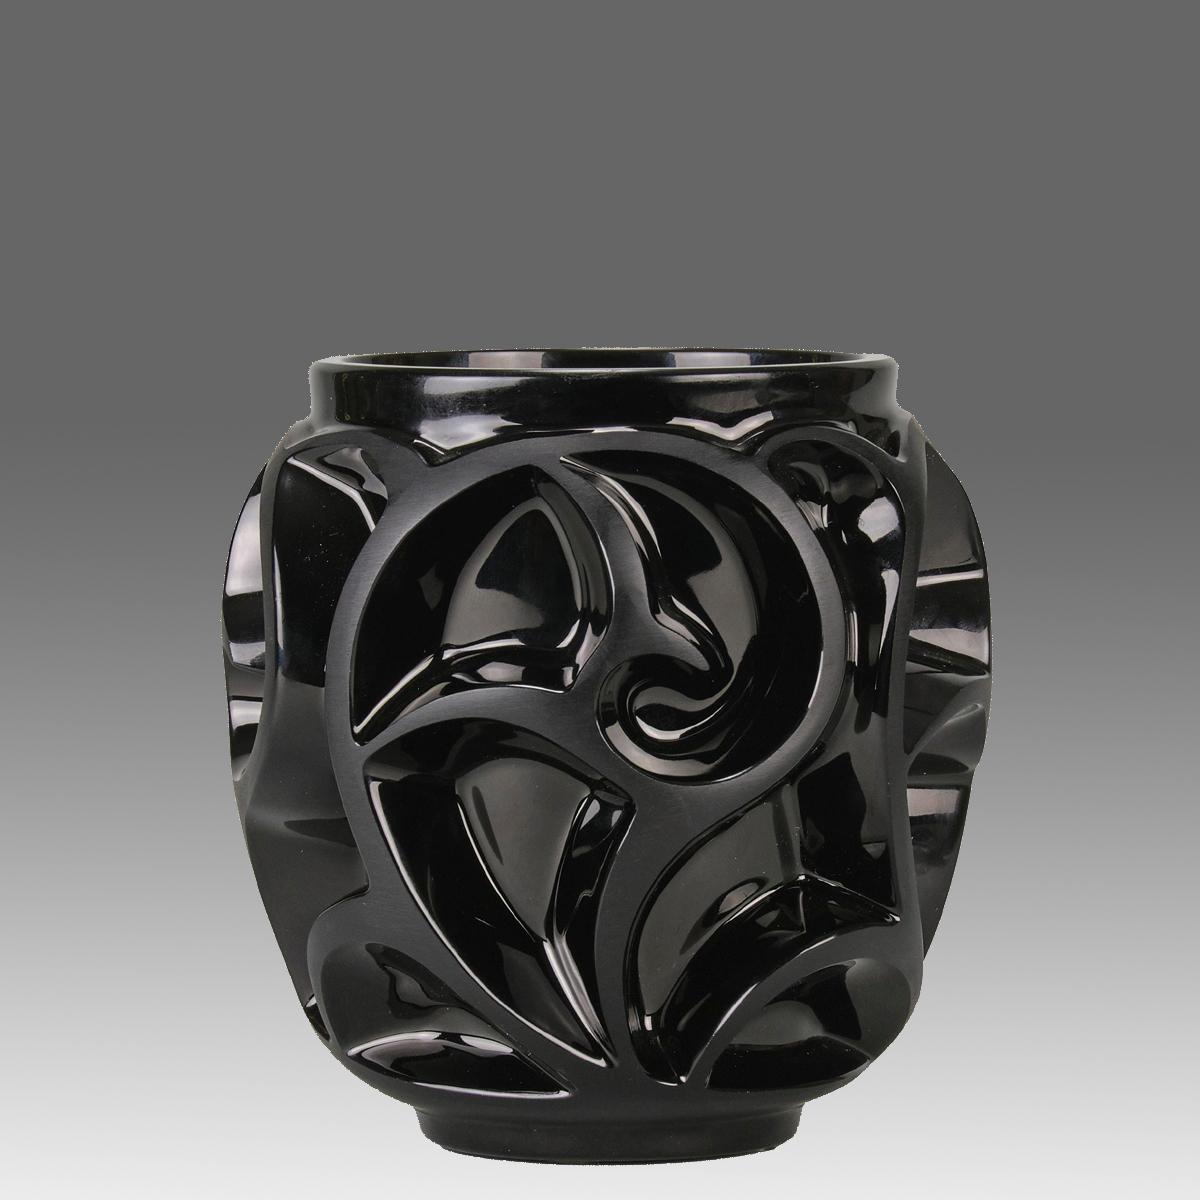 A dramatic black glass vase decorated with striking satin finished enamel swirls against a polished background, signed Lalique France.

ADDITIONAL INFORMATION
Height:                                       12.5 cm

Width:                             